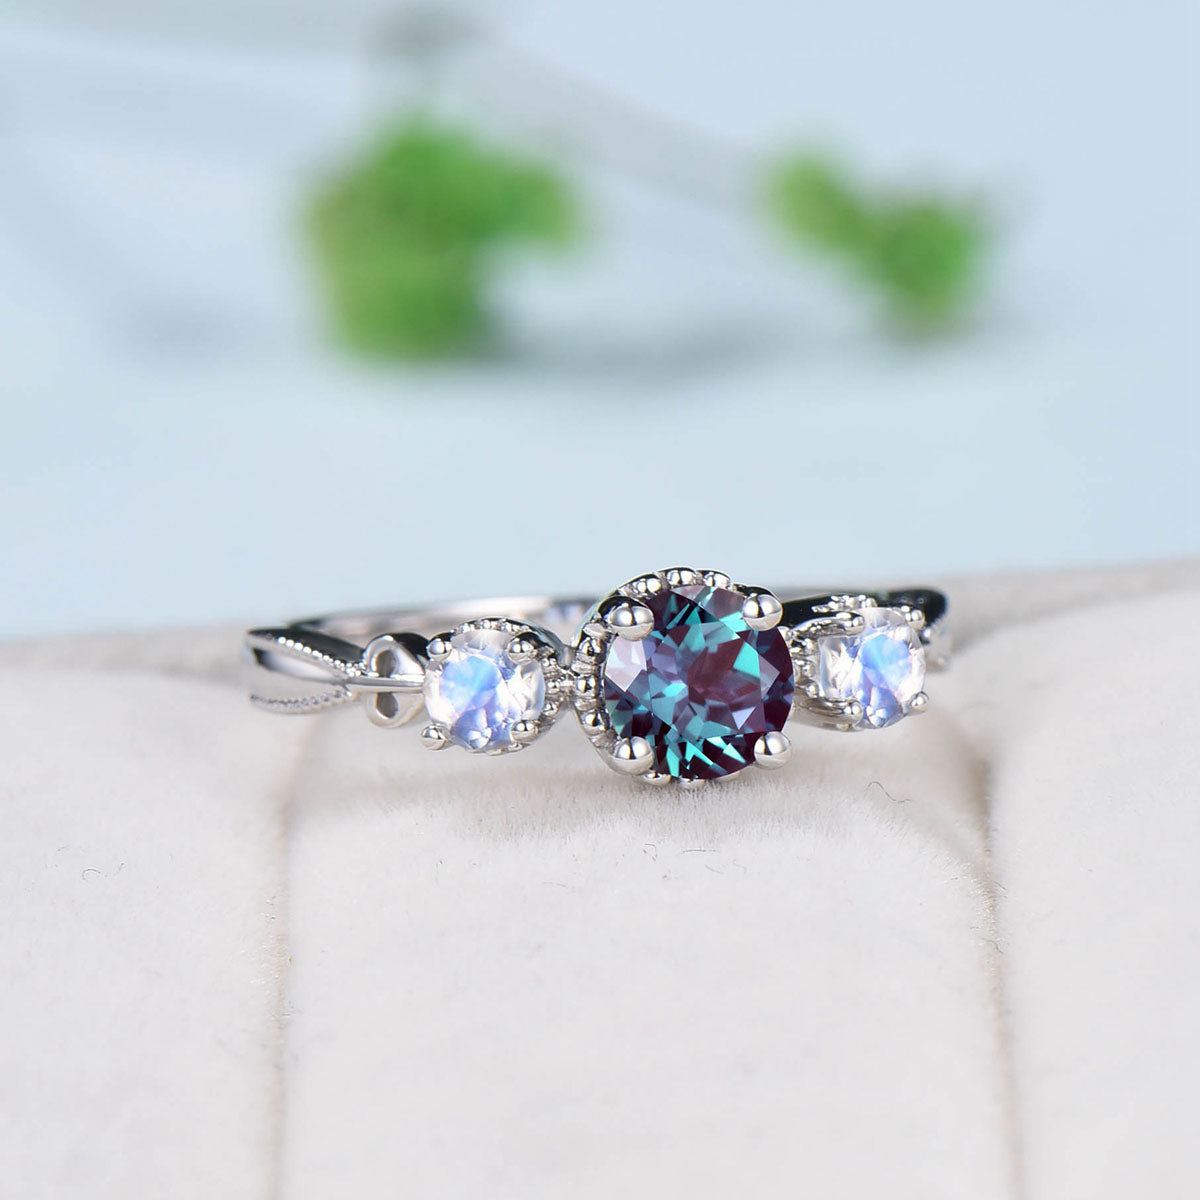 Alexandrite ring vintage round Alexandrite engagement ring three stone moonstone ring rose gold for women promise ring unique wedding ring - PENFINE